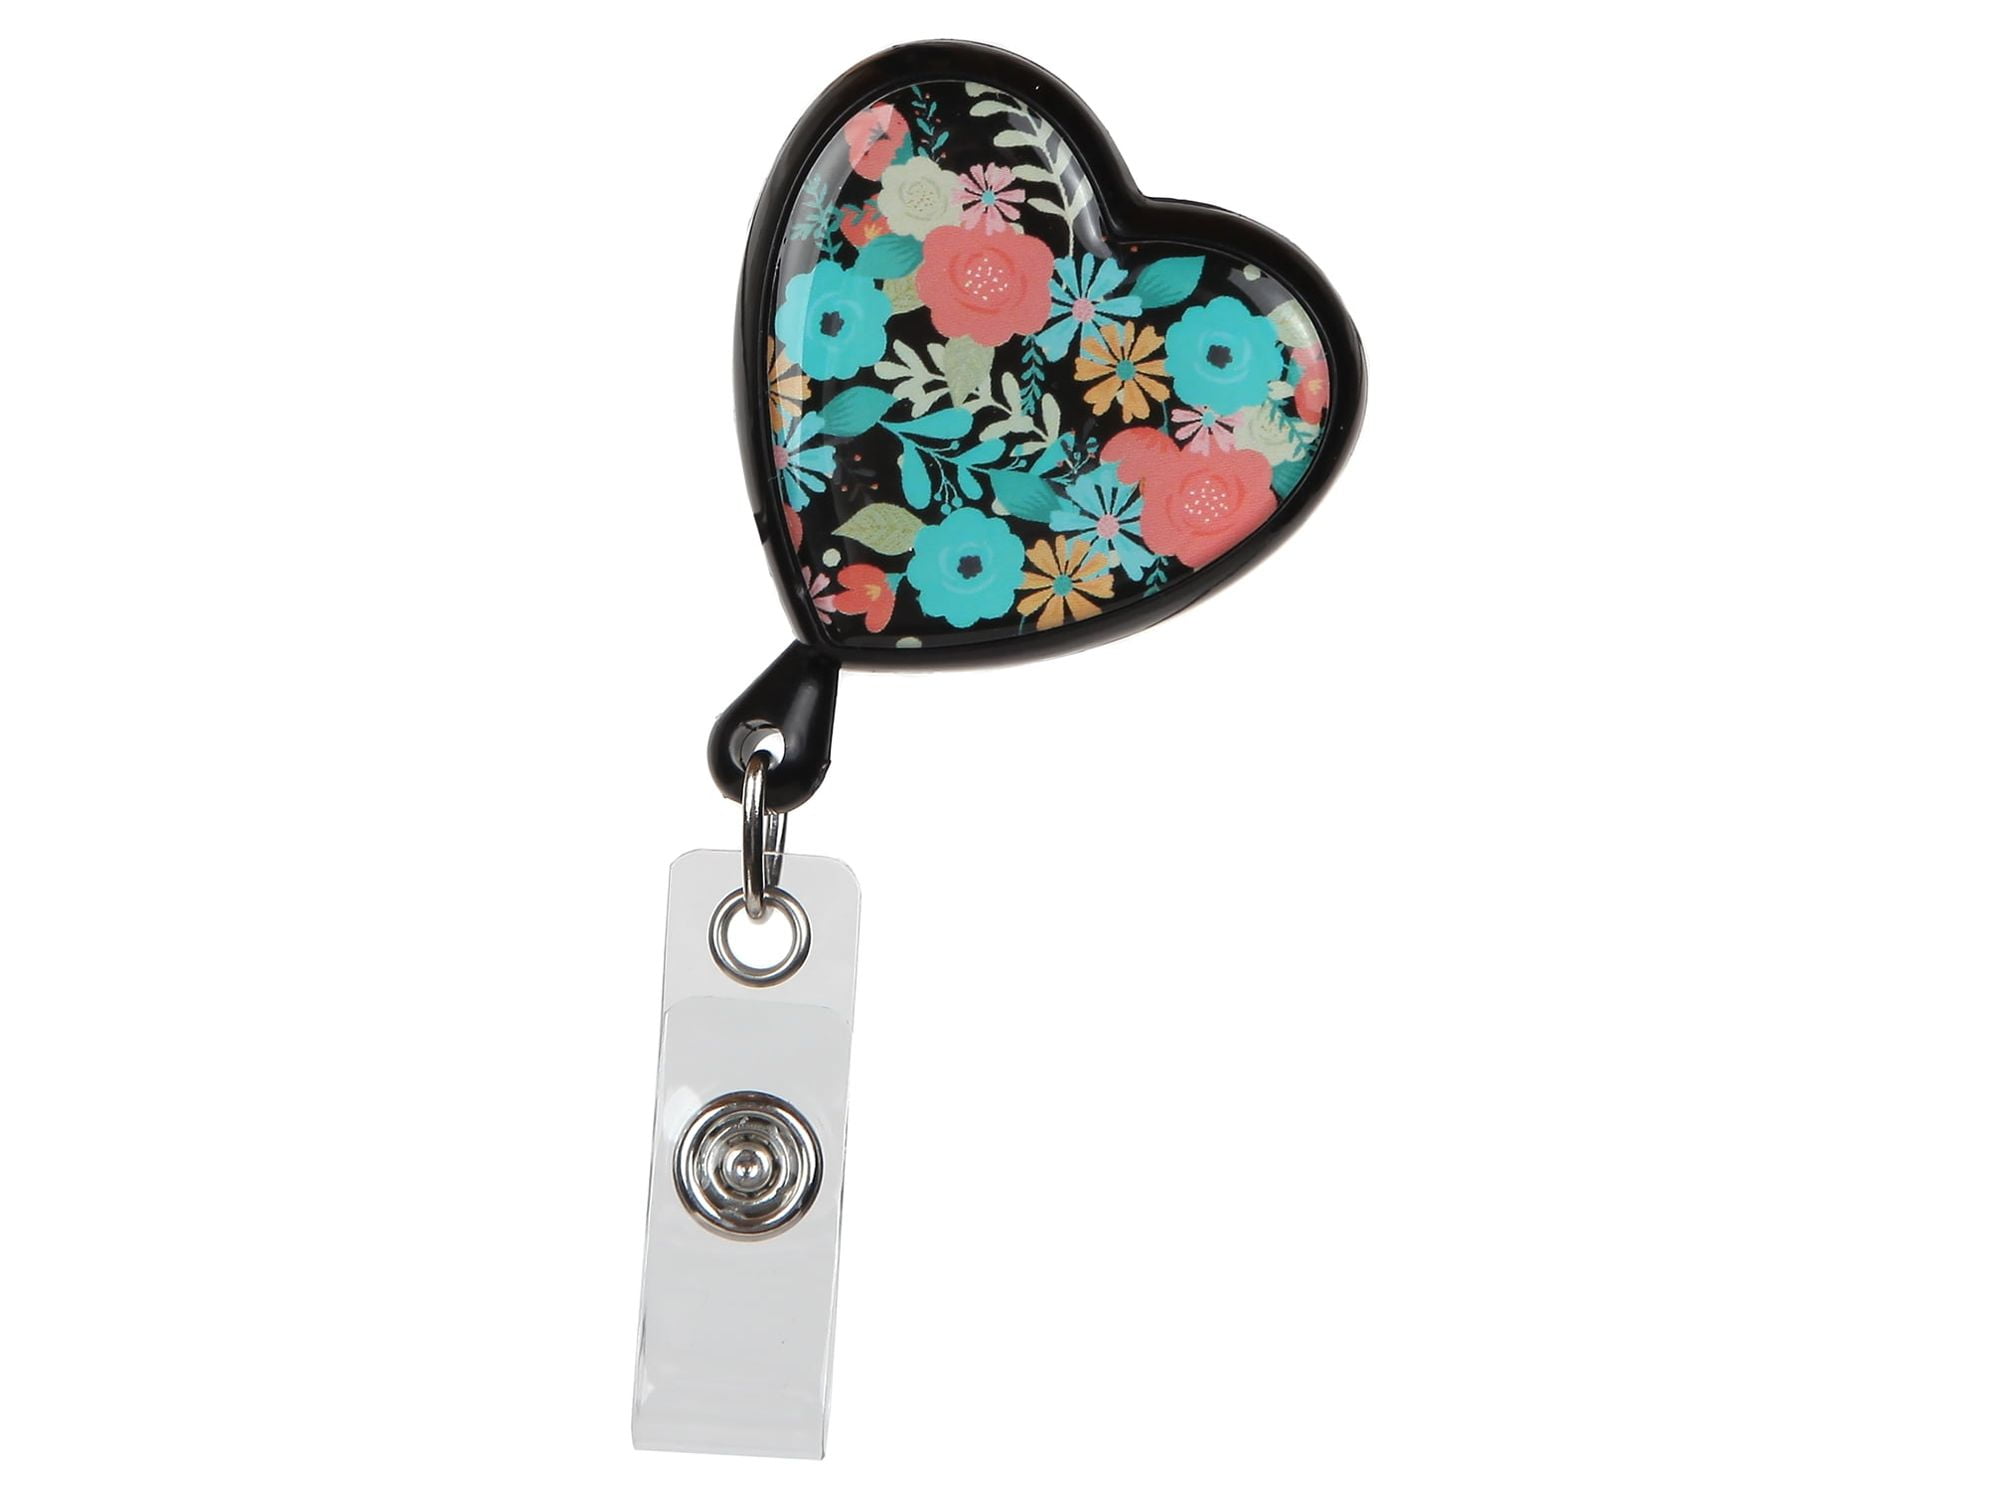 Andaz Press Retractable Badge Reel Holder with Clip, Pink Peonies Flowers, Floral Design, Size: Large, White